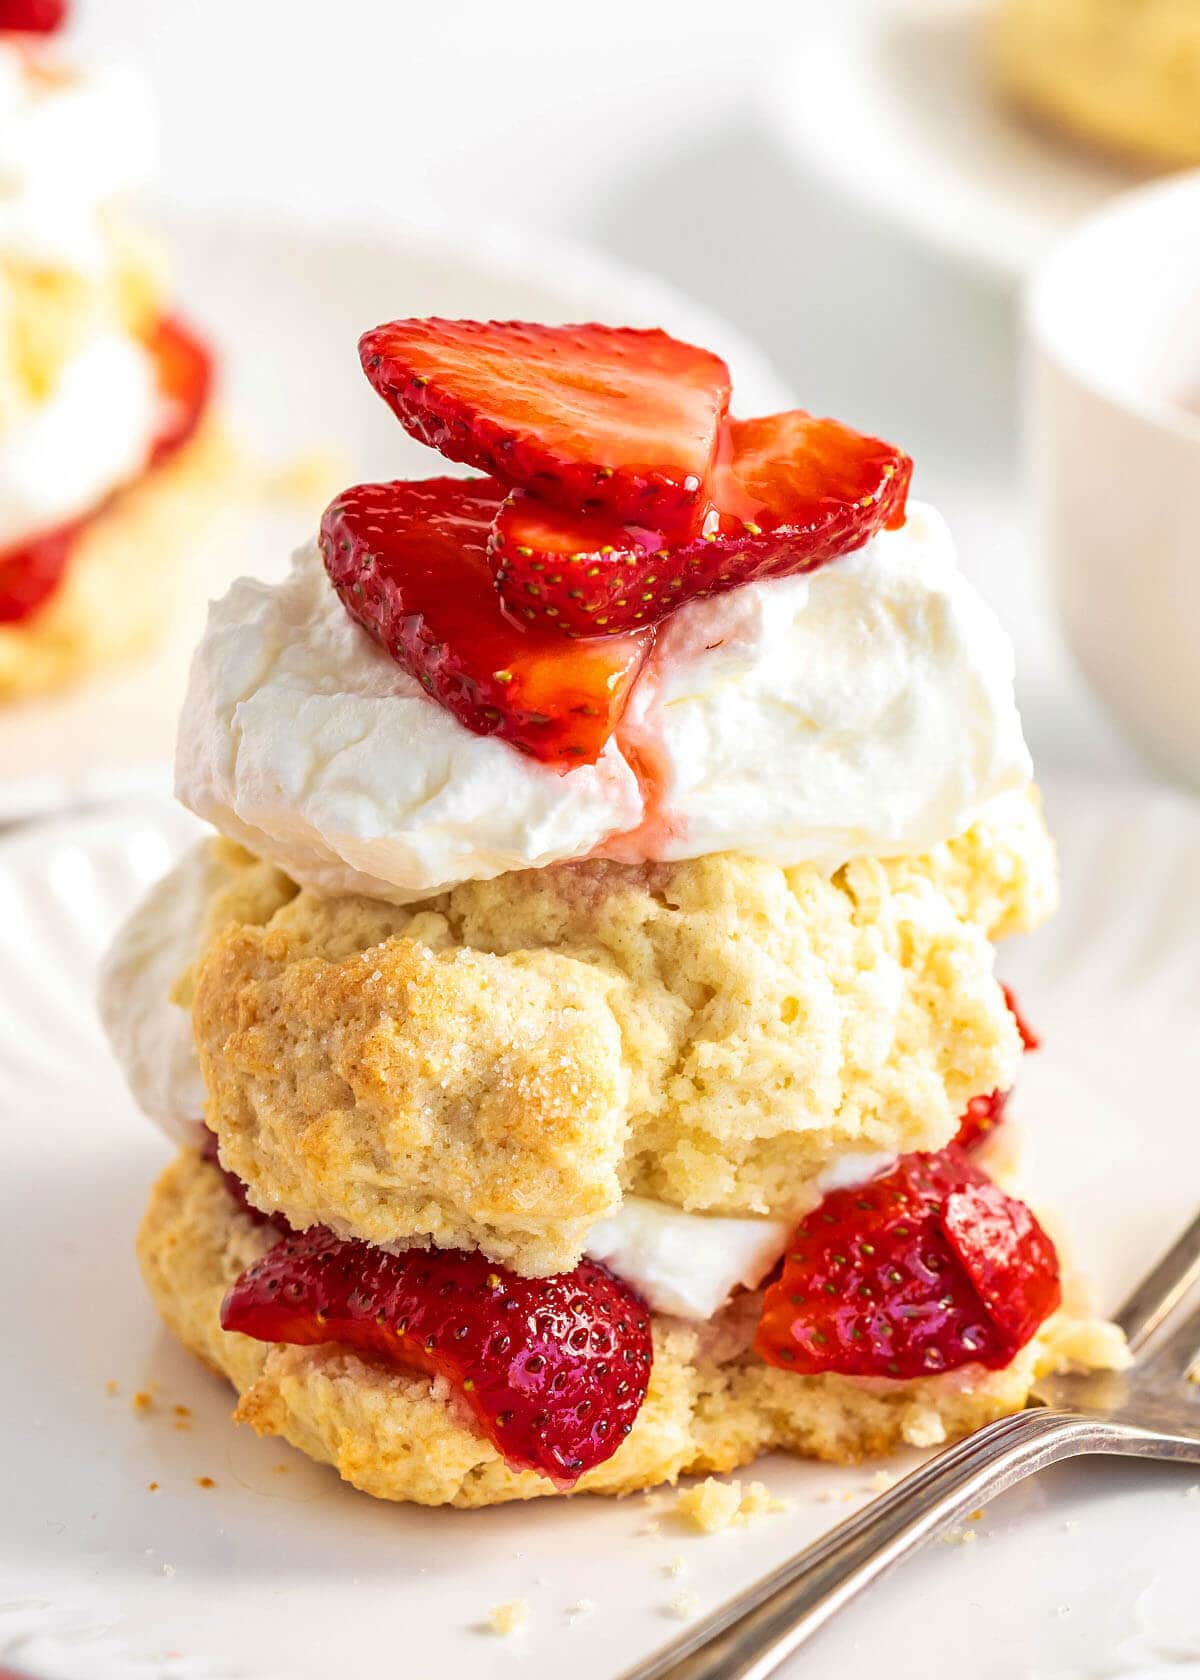 Old fashioned strawberry shortcake with whipped cream and strawberries on top.